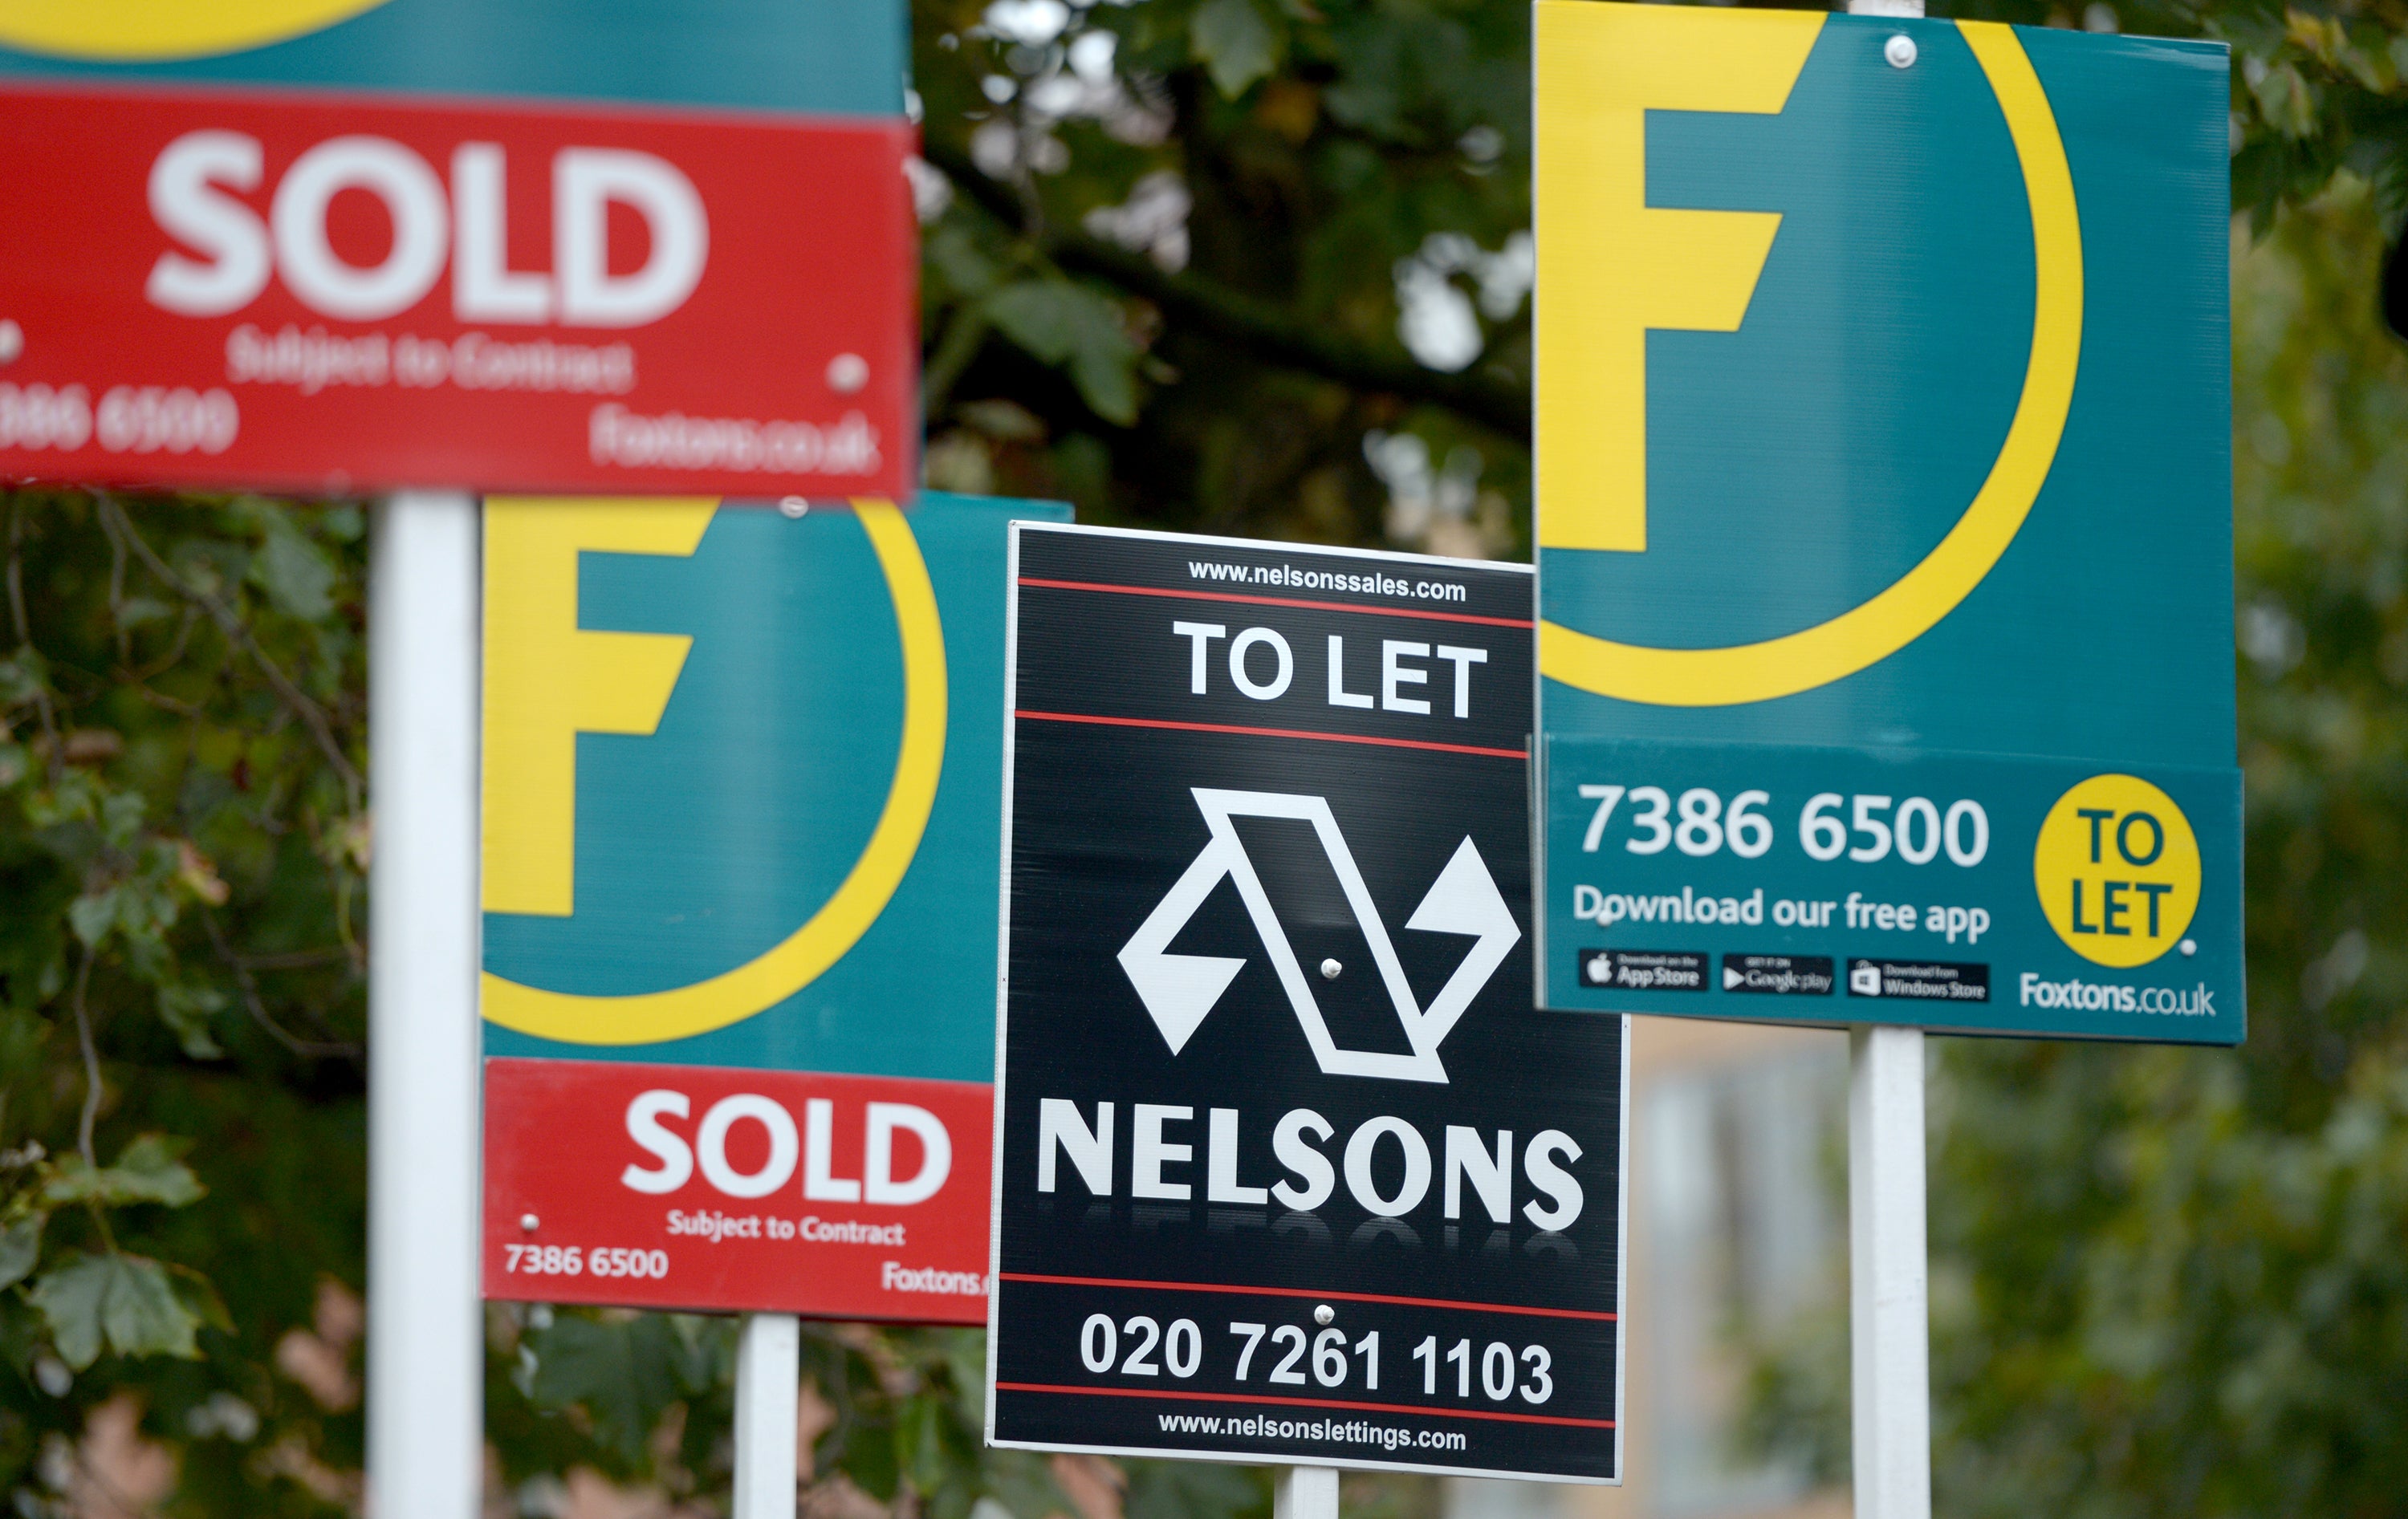 The number of house sales taking place across the UK dipped in April, according to figures from HM Revenue and Customs (Anthony Devlin/PA)